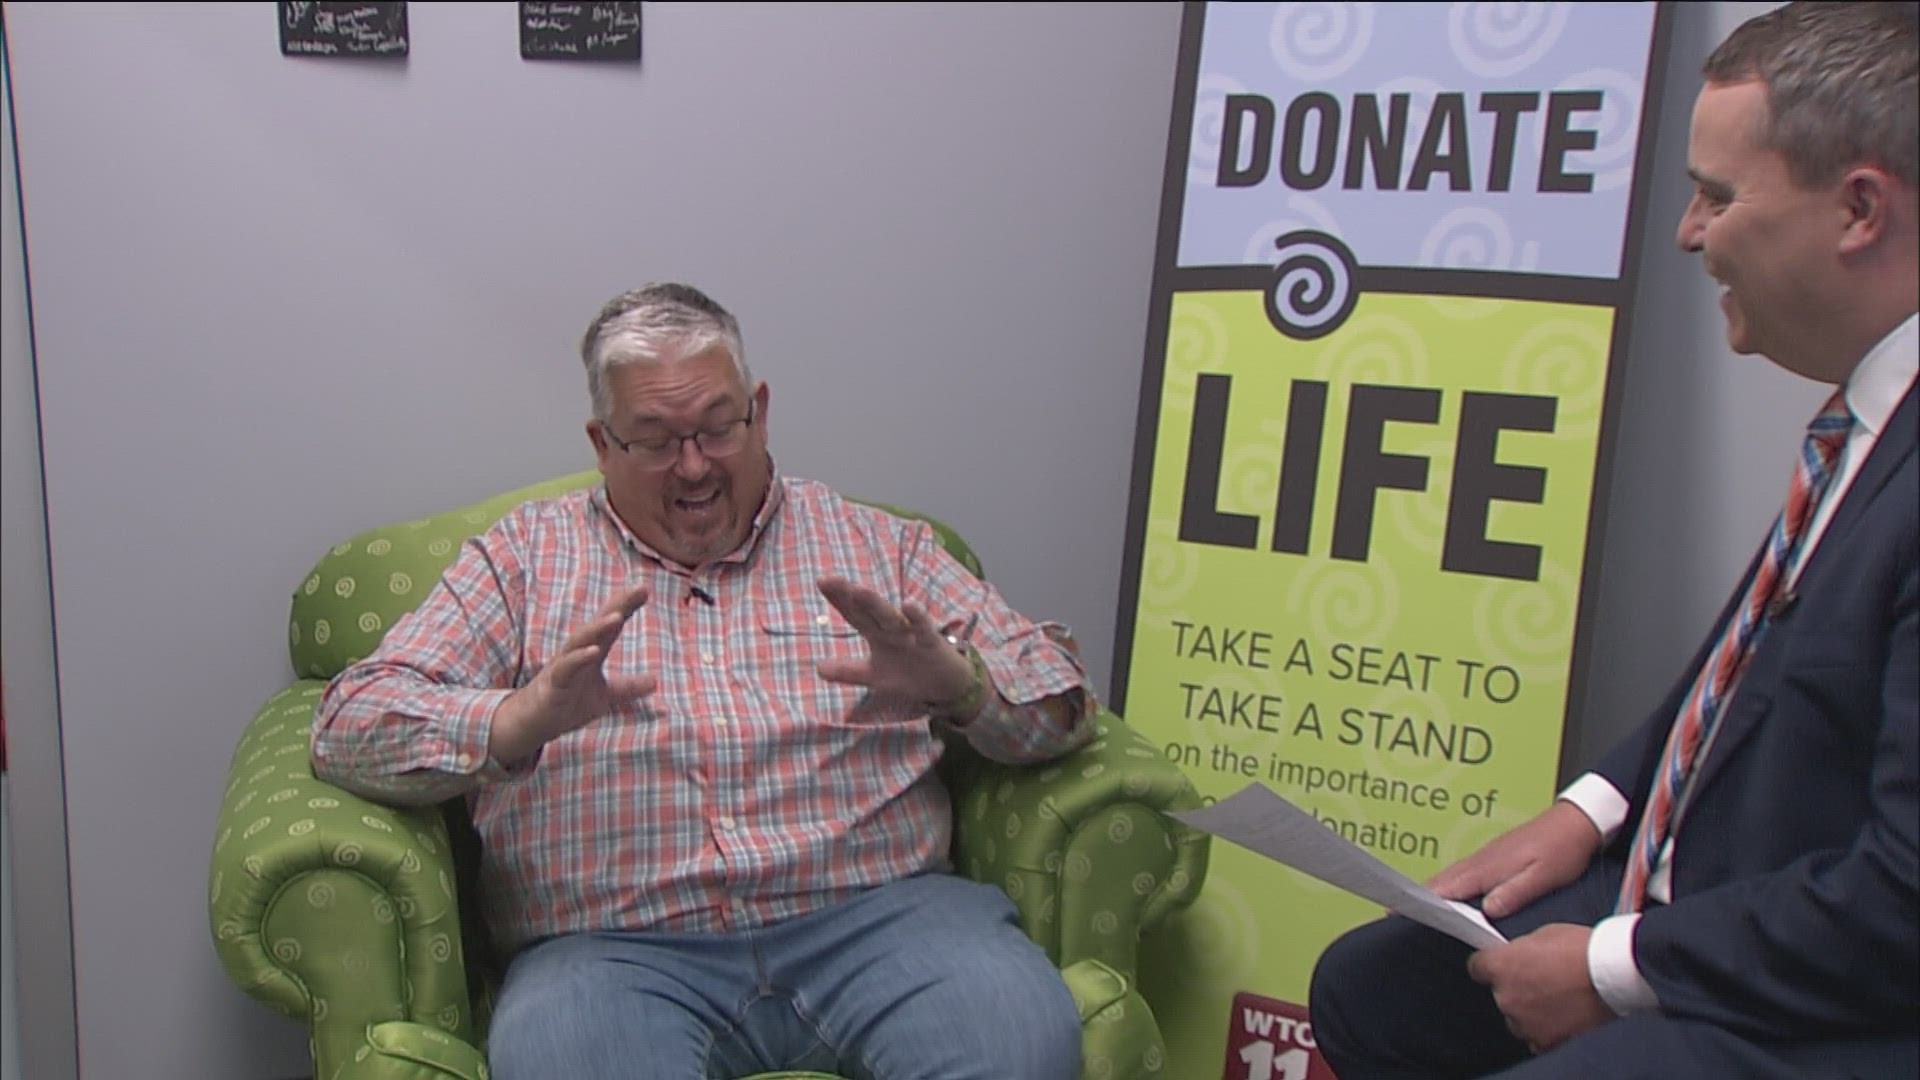 Todd Bickley, manager of Recovery Services for Life Connection of Ohio, talks about the work that goes into making organ donations and transplants possible.